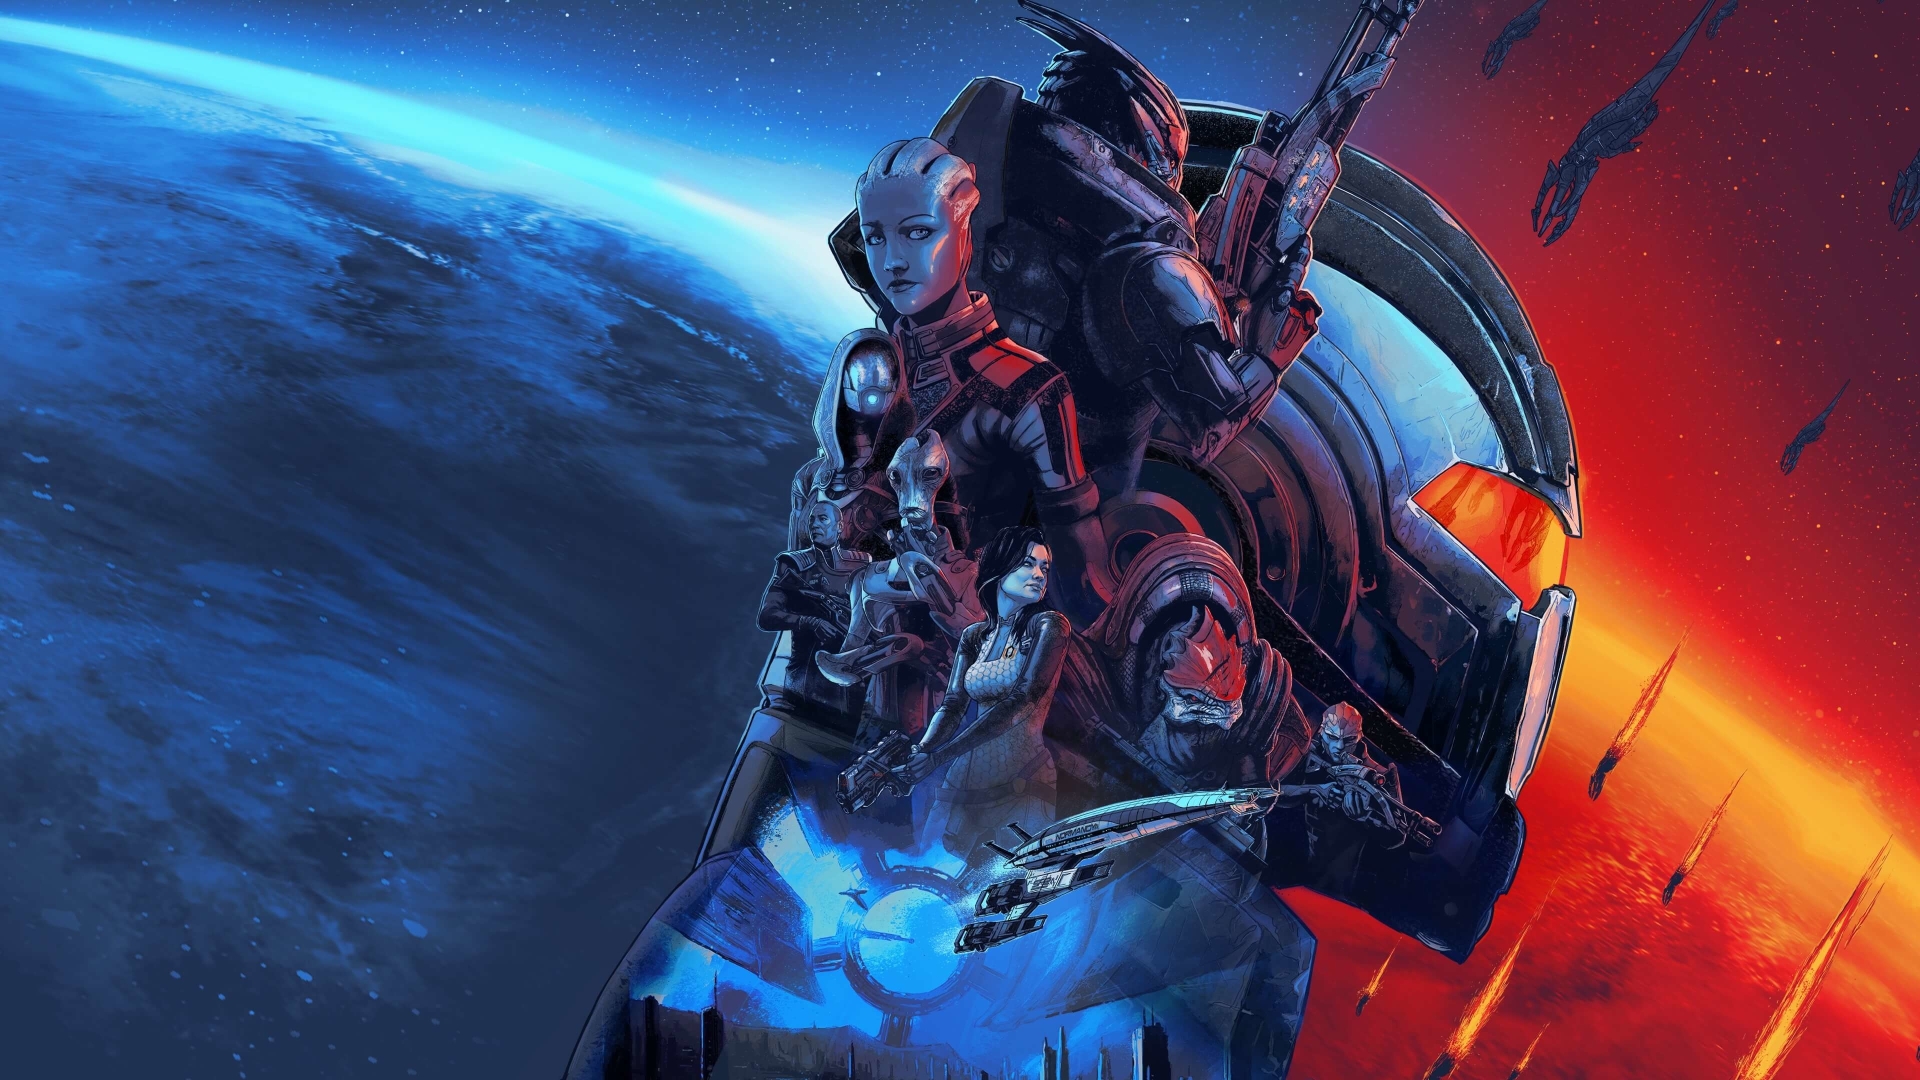 free for mac download Mass Effect